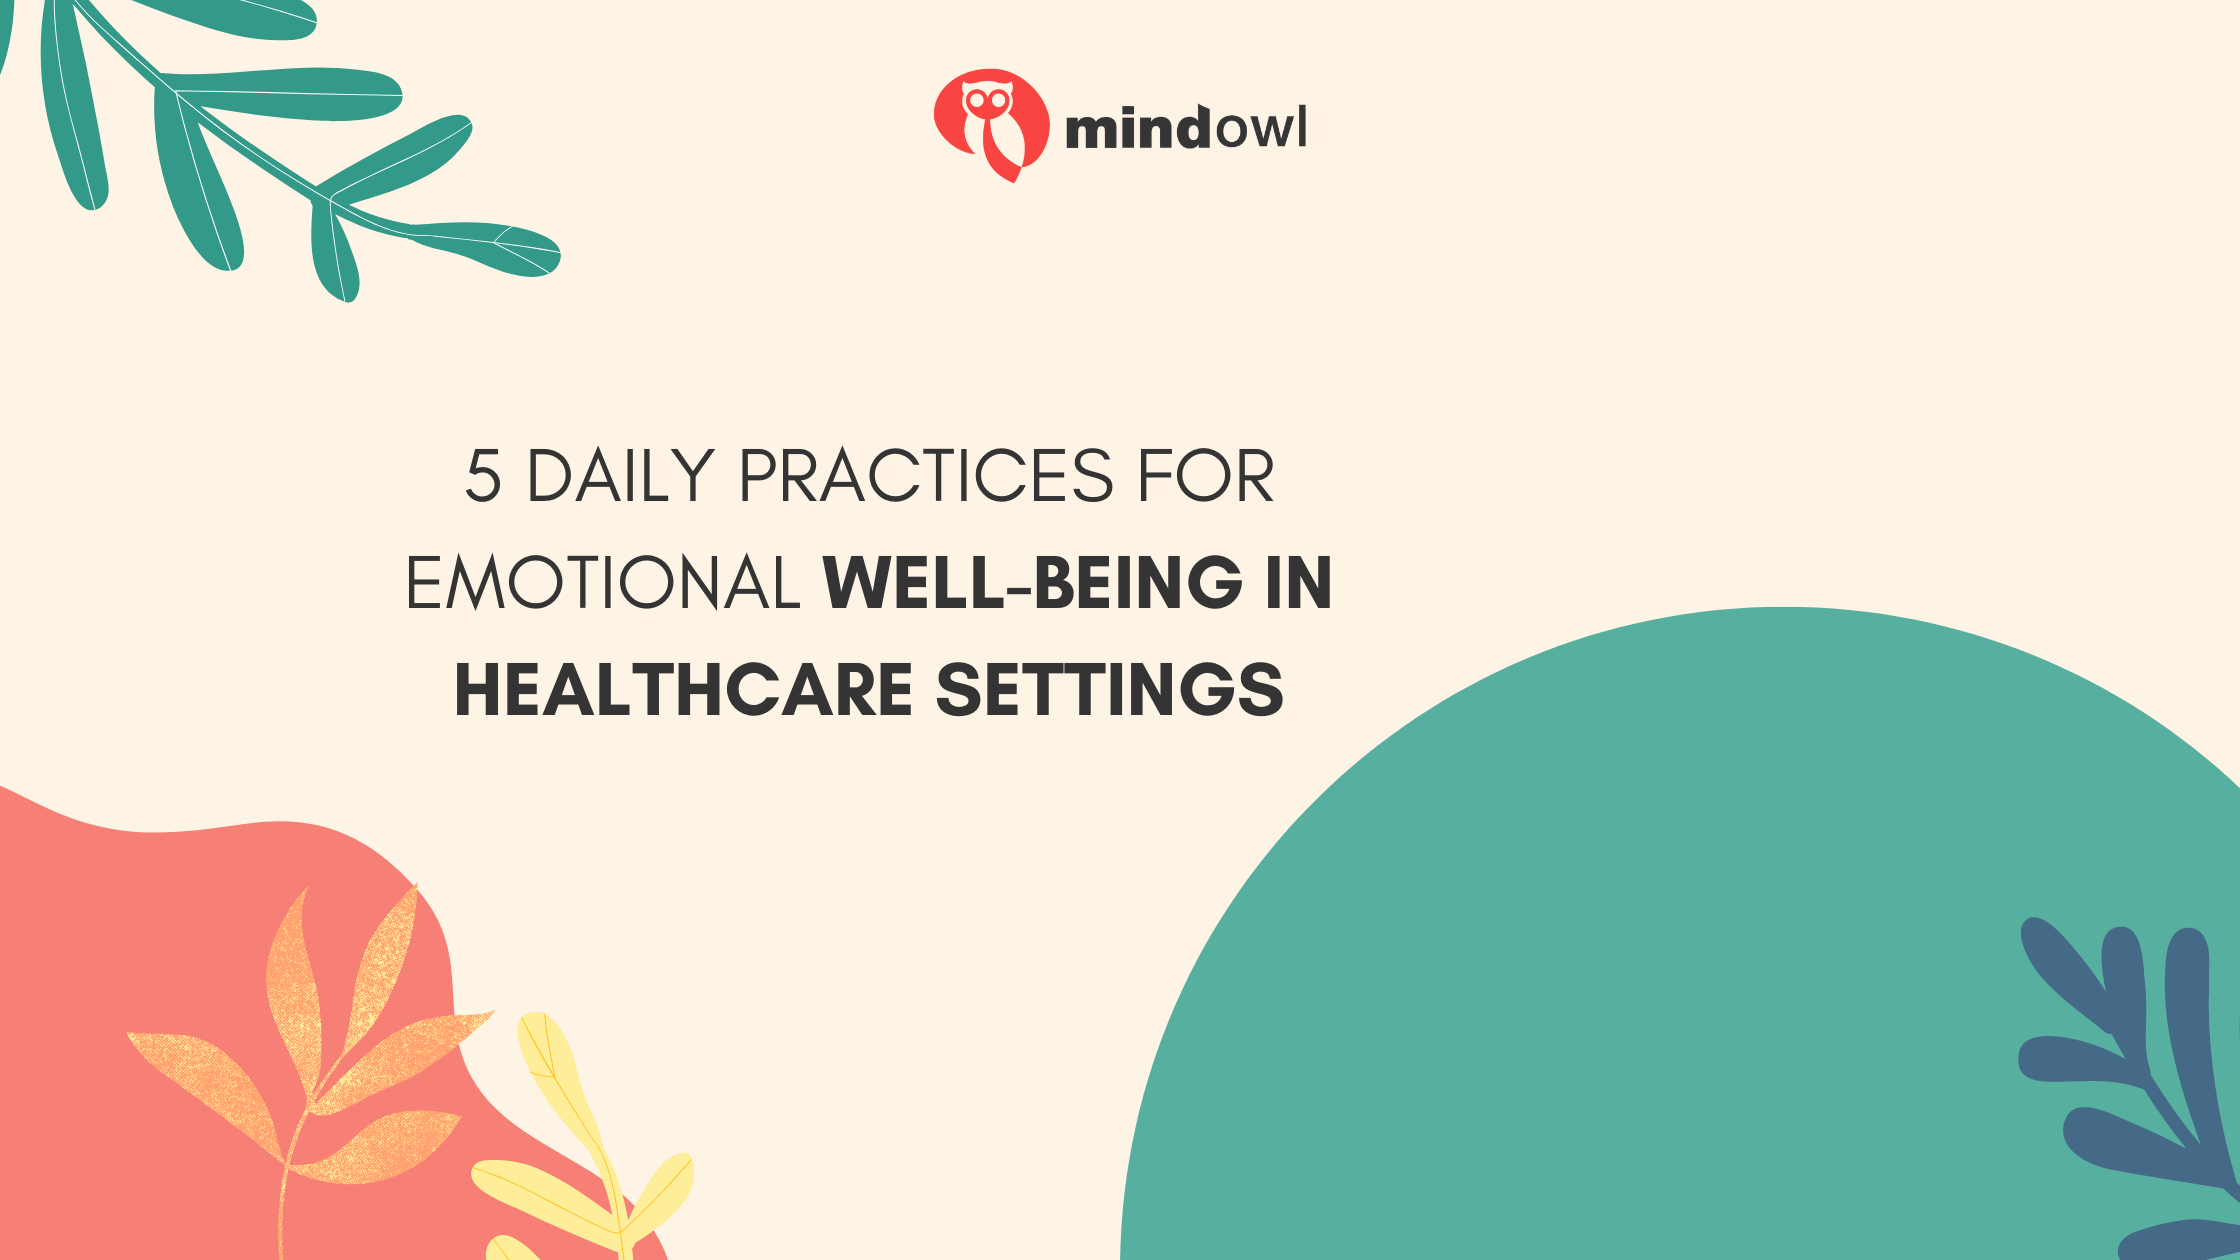 5 Daily Practices for Emotional Well-Being in Healthcare Settings